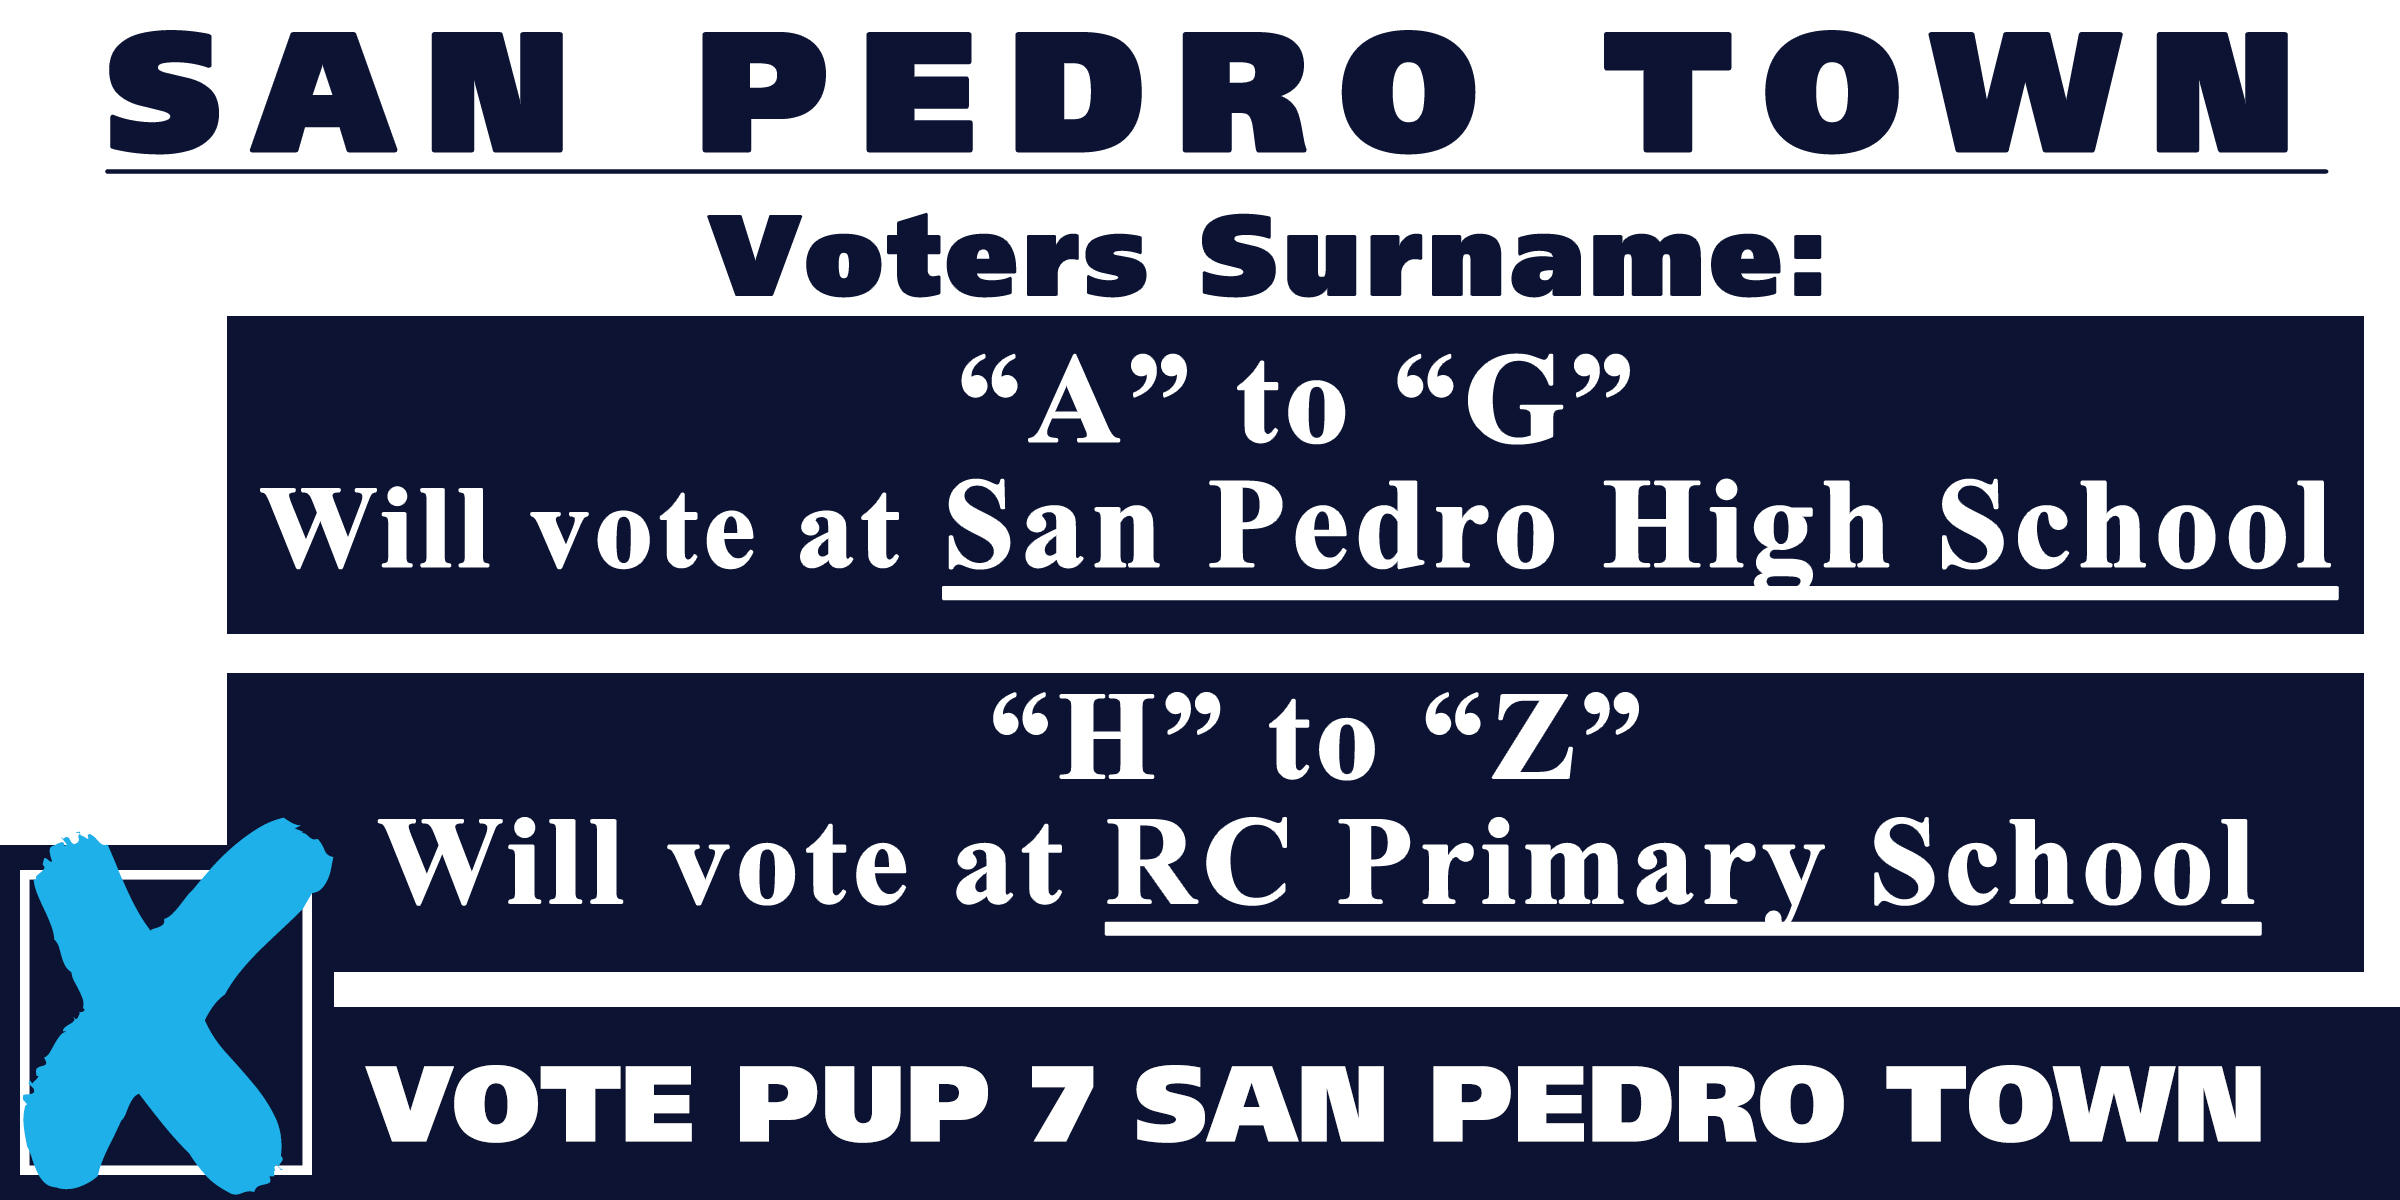 Voting areas in San Pedro